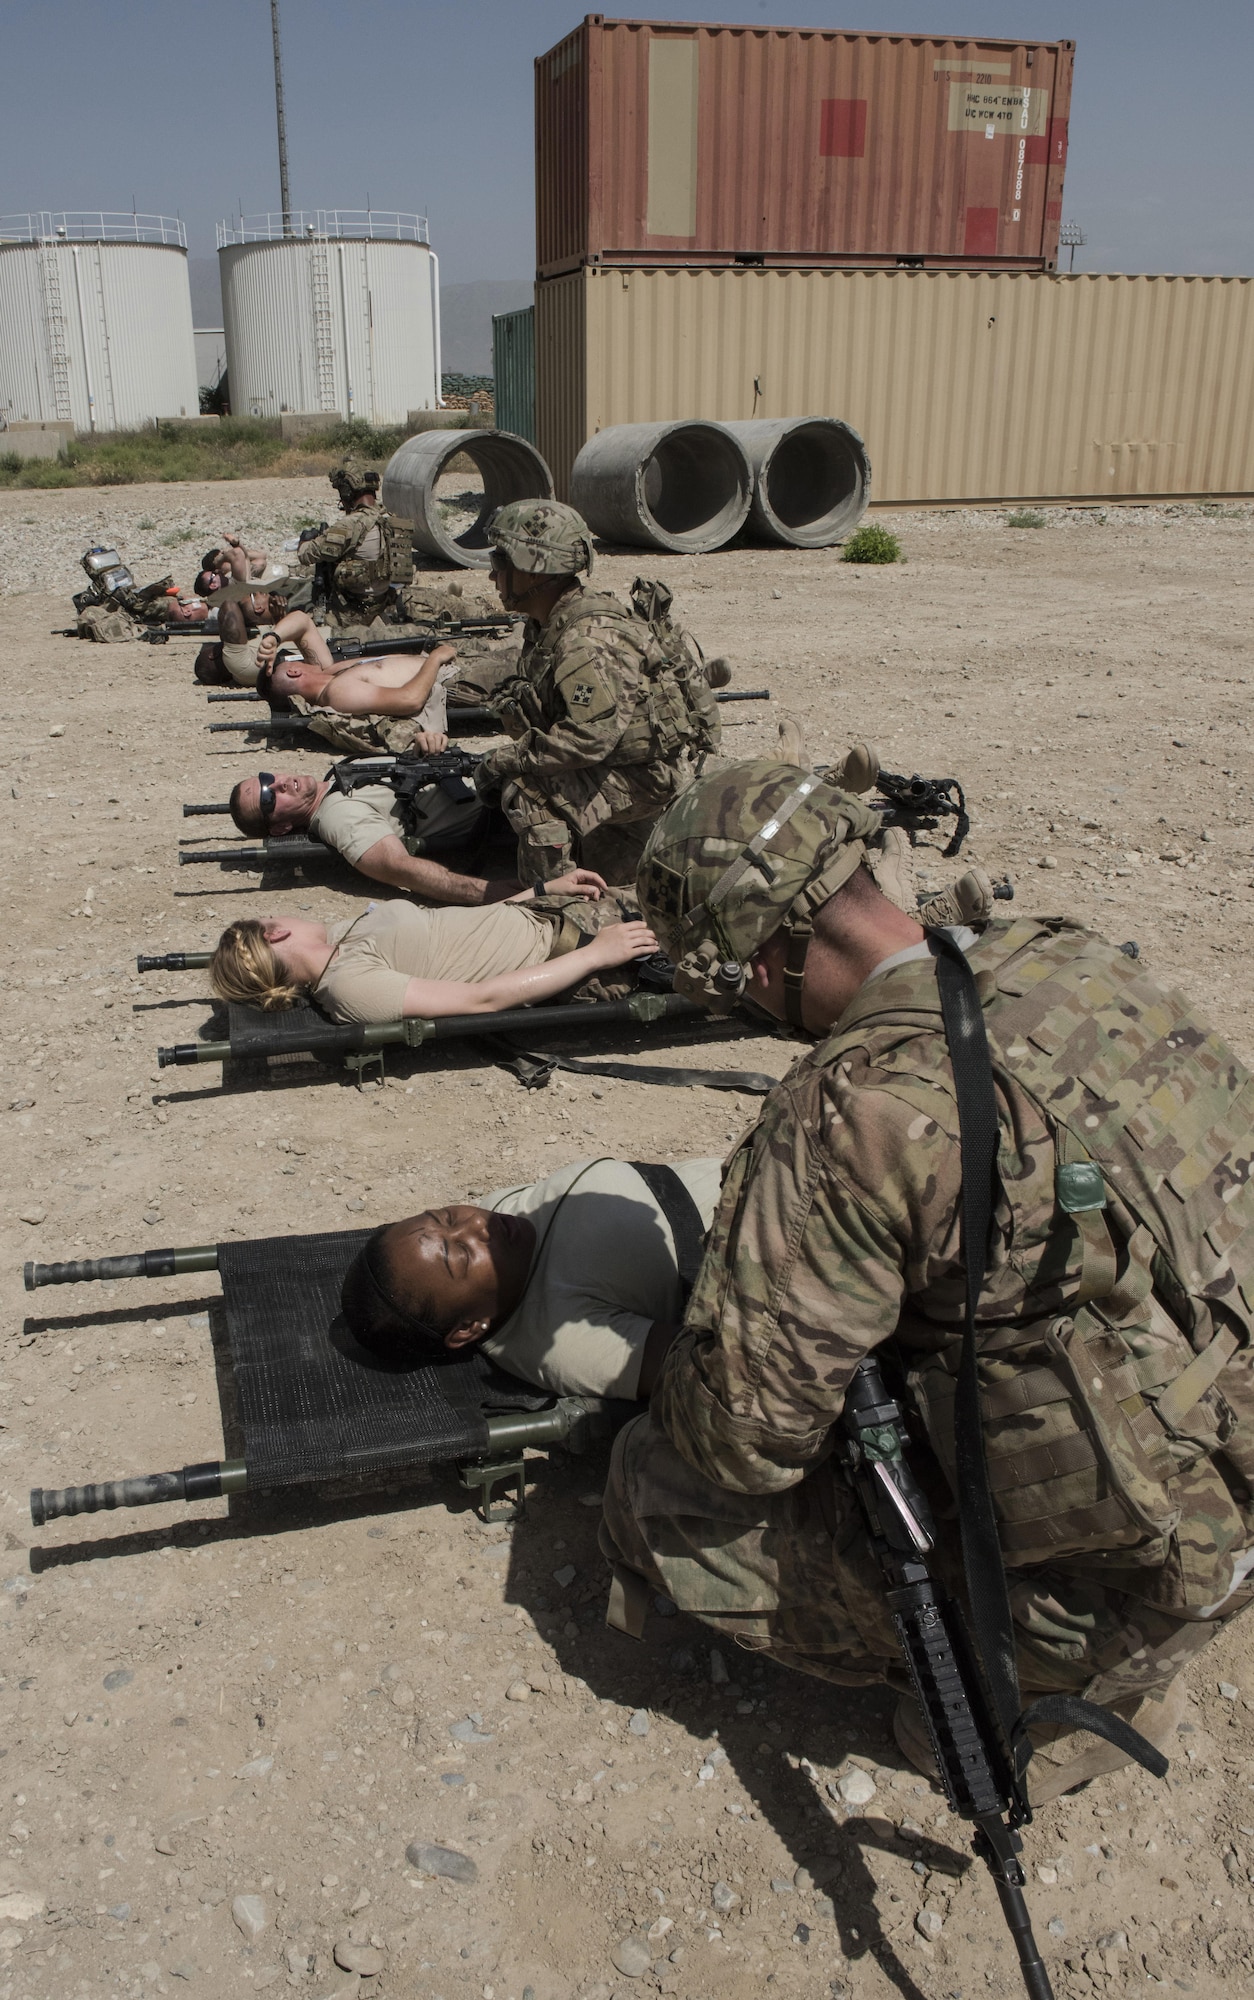 The 83rd Expeditionary Rescue Squadron pararescue specialists along with soldiers from Task Force Chosen work together to treat wounded patients during a joint mass casualty and extraction exercise, June 16, 2016 at Bagram Airfield, Afghanistan. Airmen from the 455th AEW acted as wounded patients, with injuries that included broken limbs, loss of eye sight and deliria. (U.S. Air Force photo by Tech. Sgt. Tyrona Lawson)